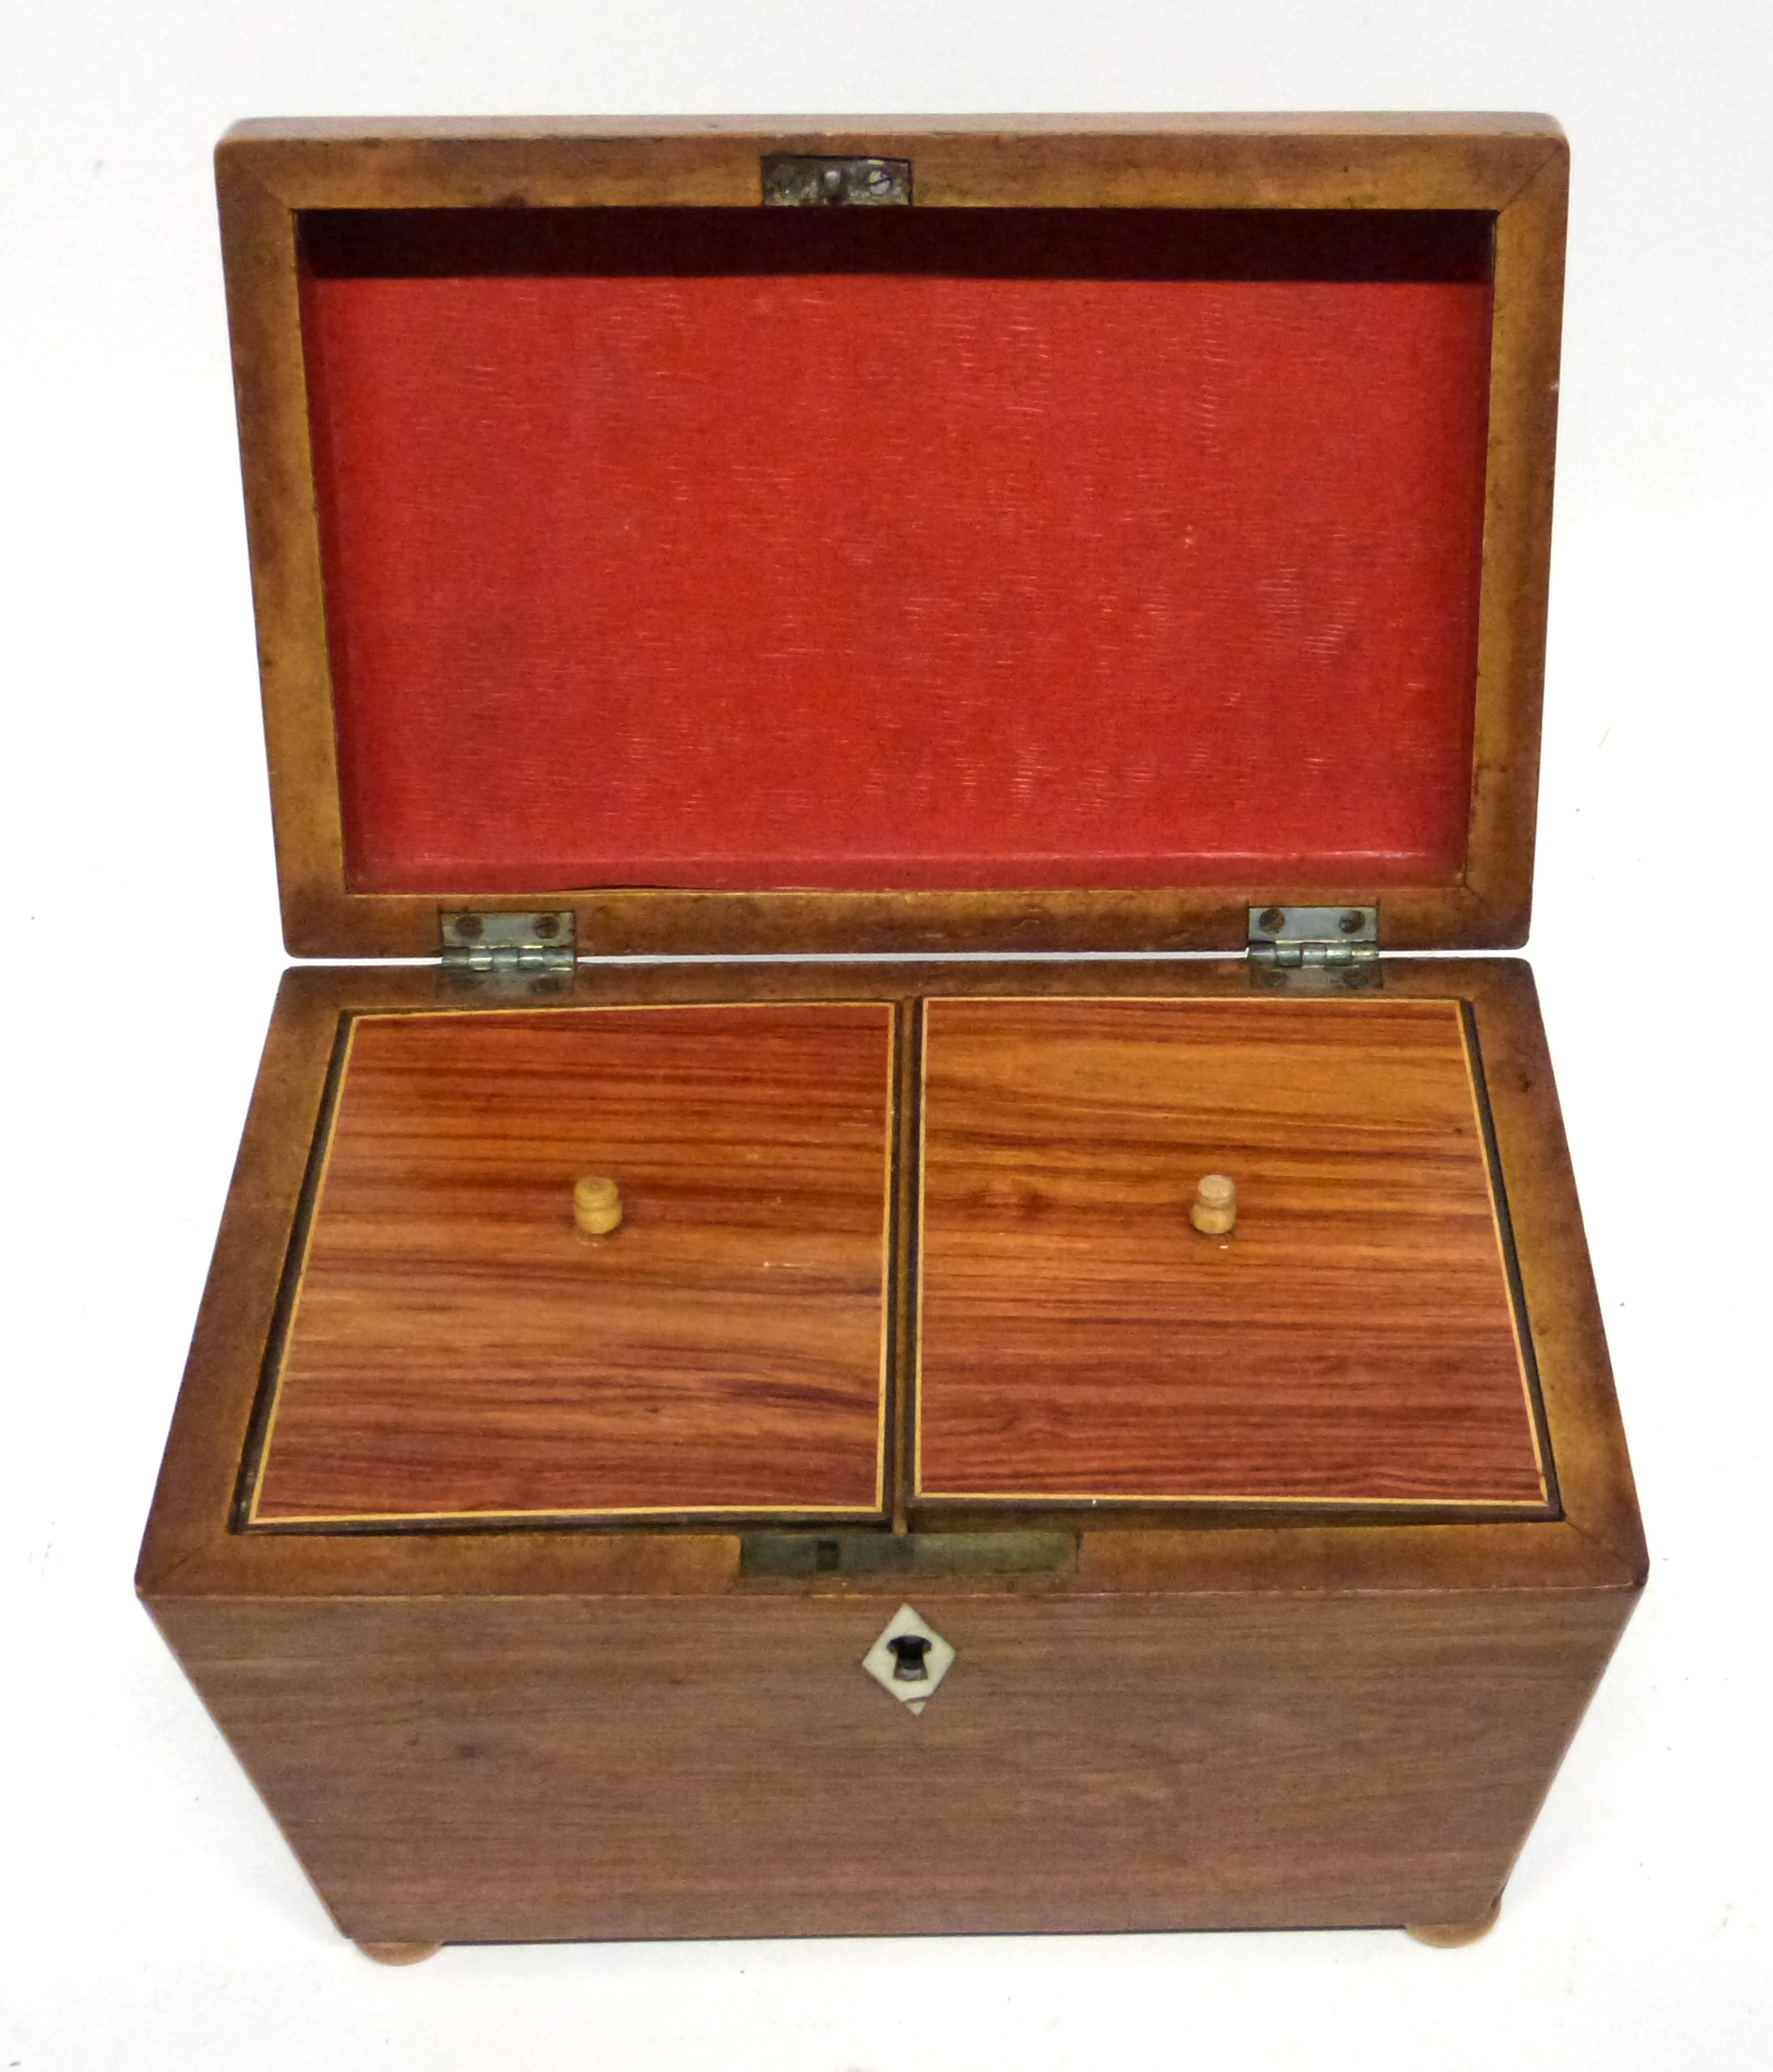 Regency style caddy with ivory inlaid escutcheon and wooden bun feet, 19cm long - Image 2 of 3